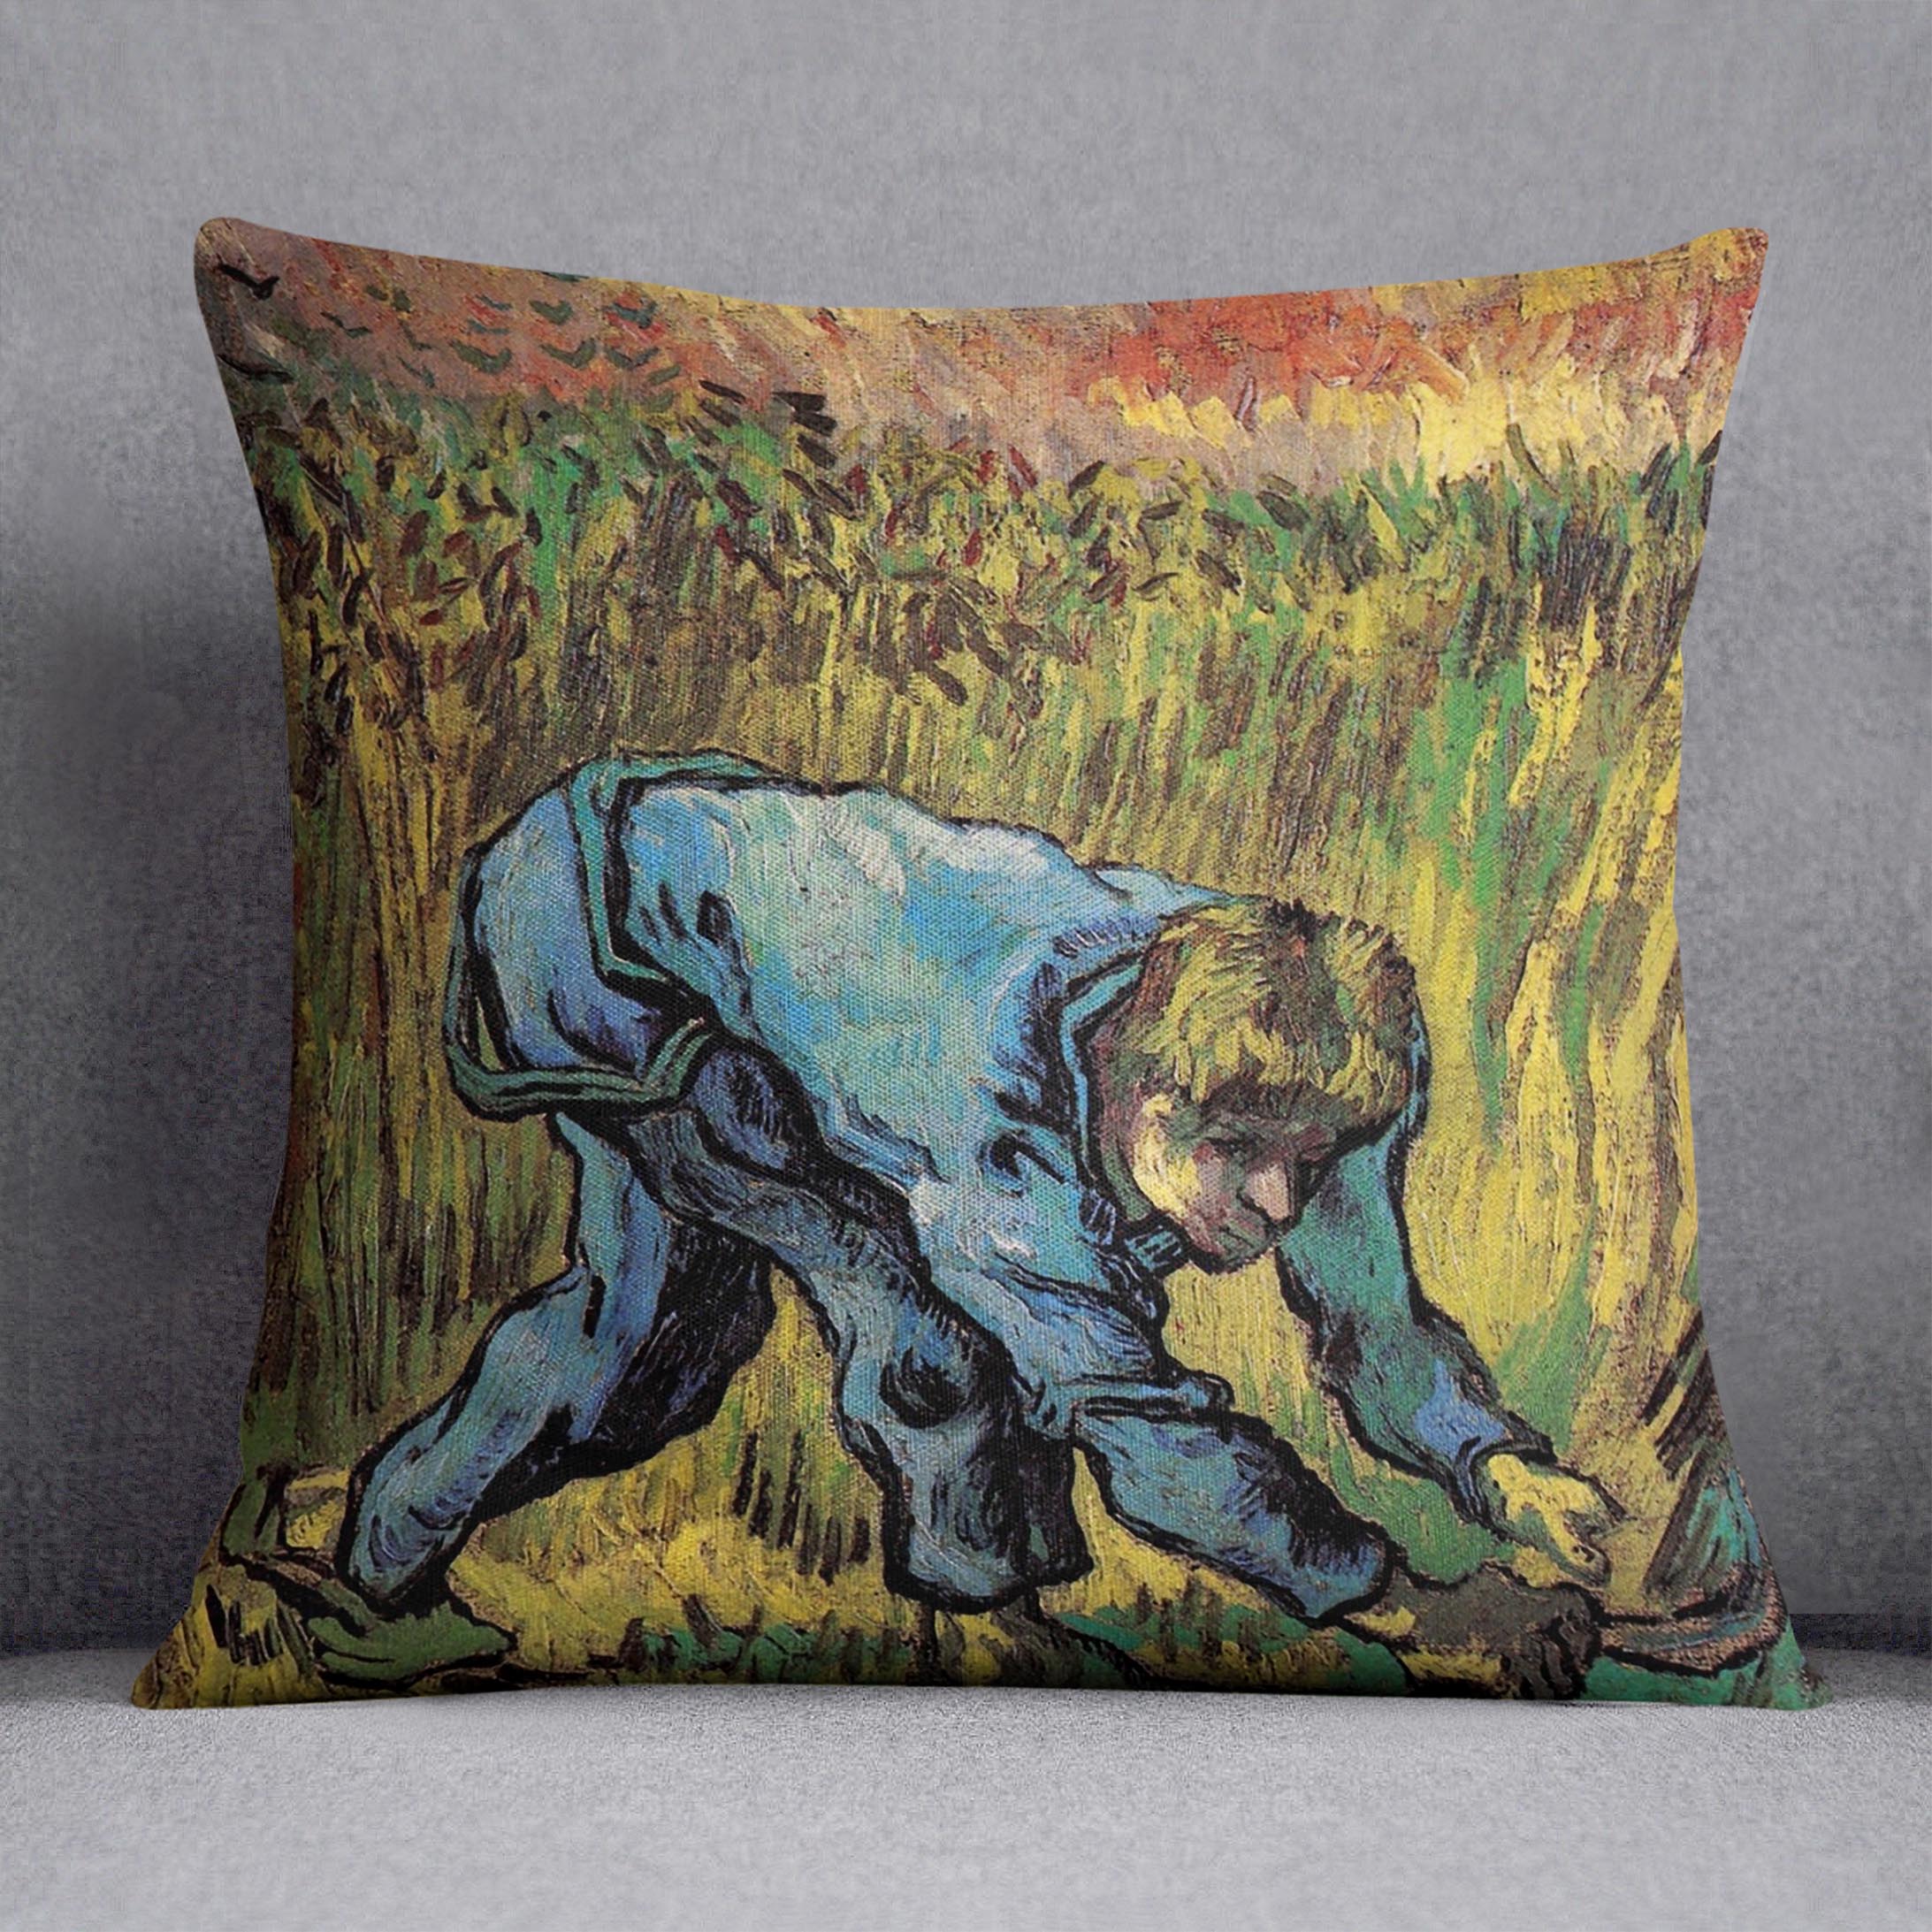 Reaper with Sickle after Millet by Van Gogh Cushion